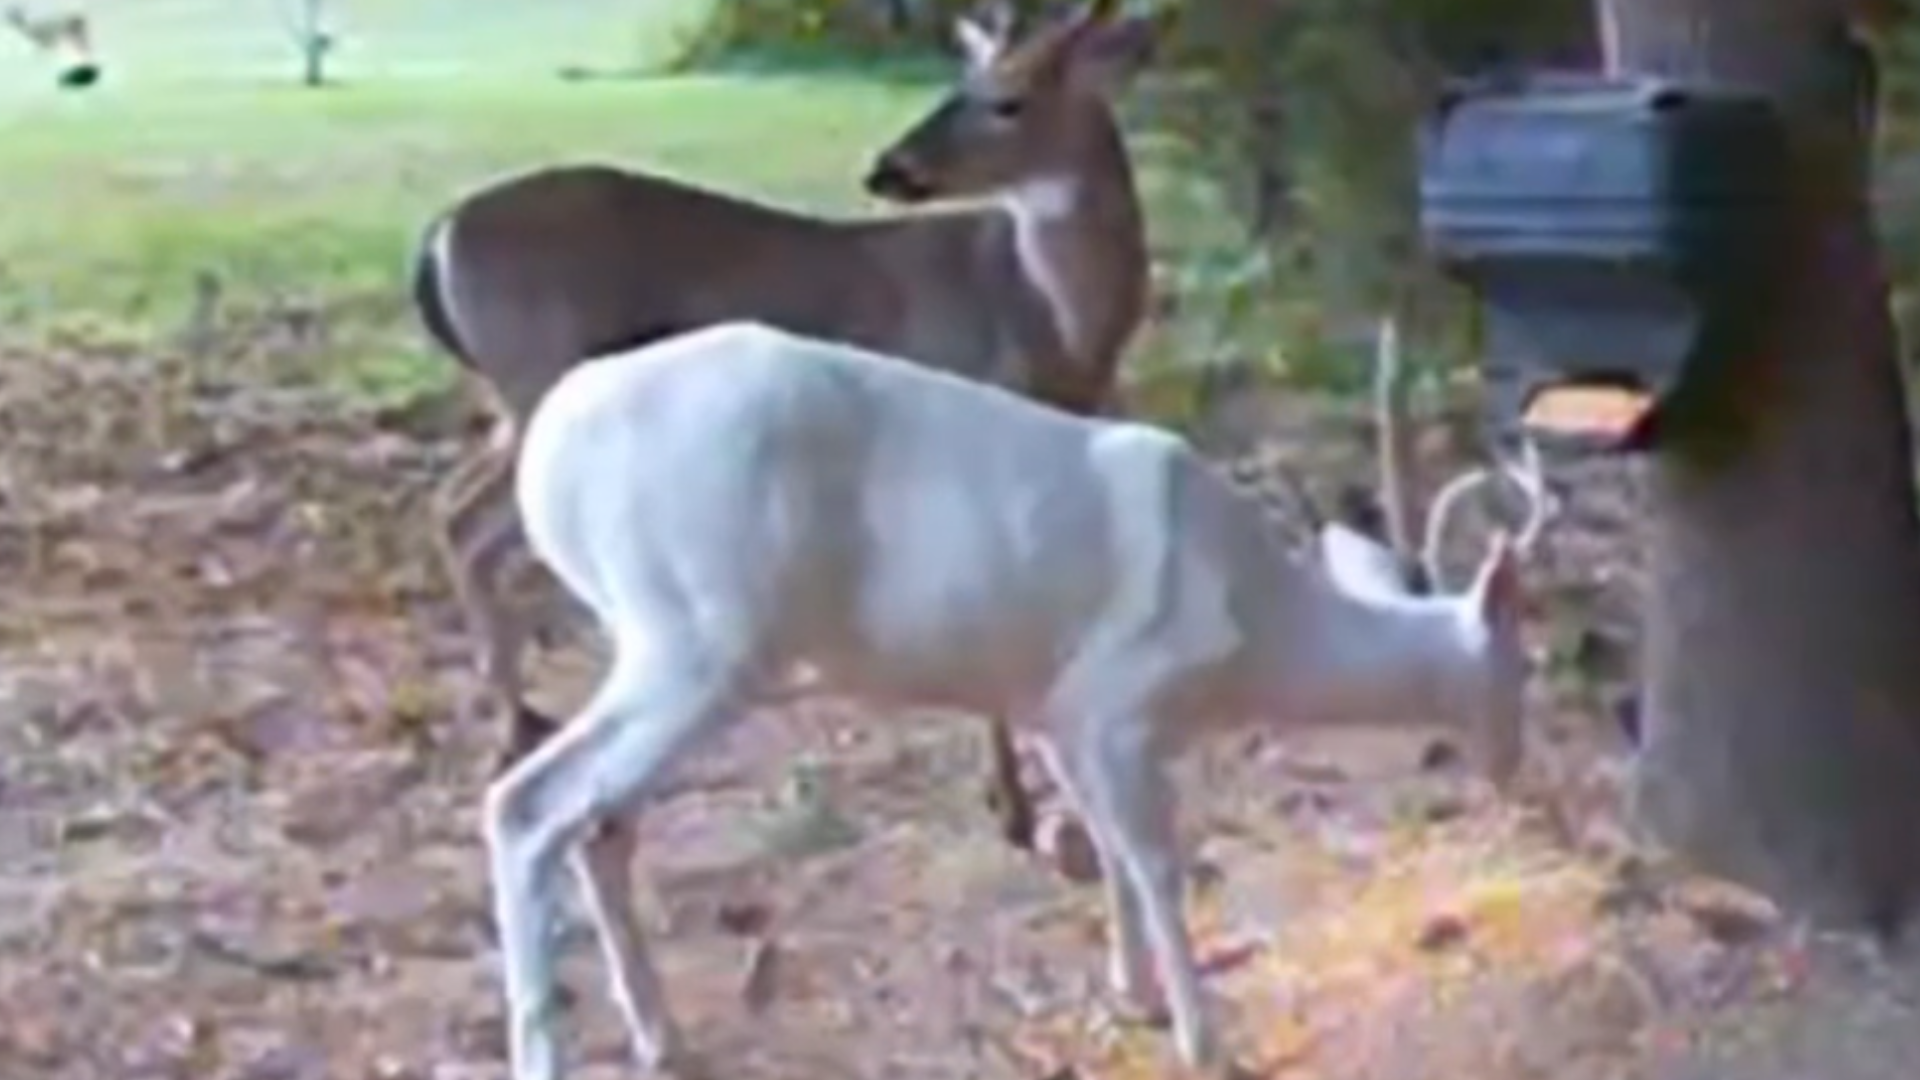 A Franklin, Tennessee woman loves to watch the wildlife in her backyard. But she was thrilled to see a rare albino deer. You have a 1-in-30,000 chance of ever seeing an albino deer, stunning in white.